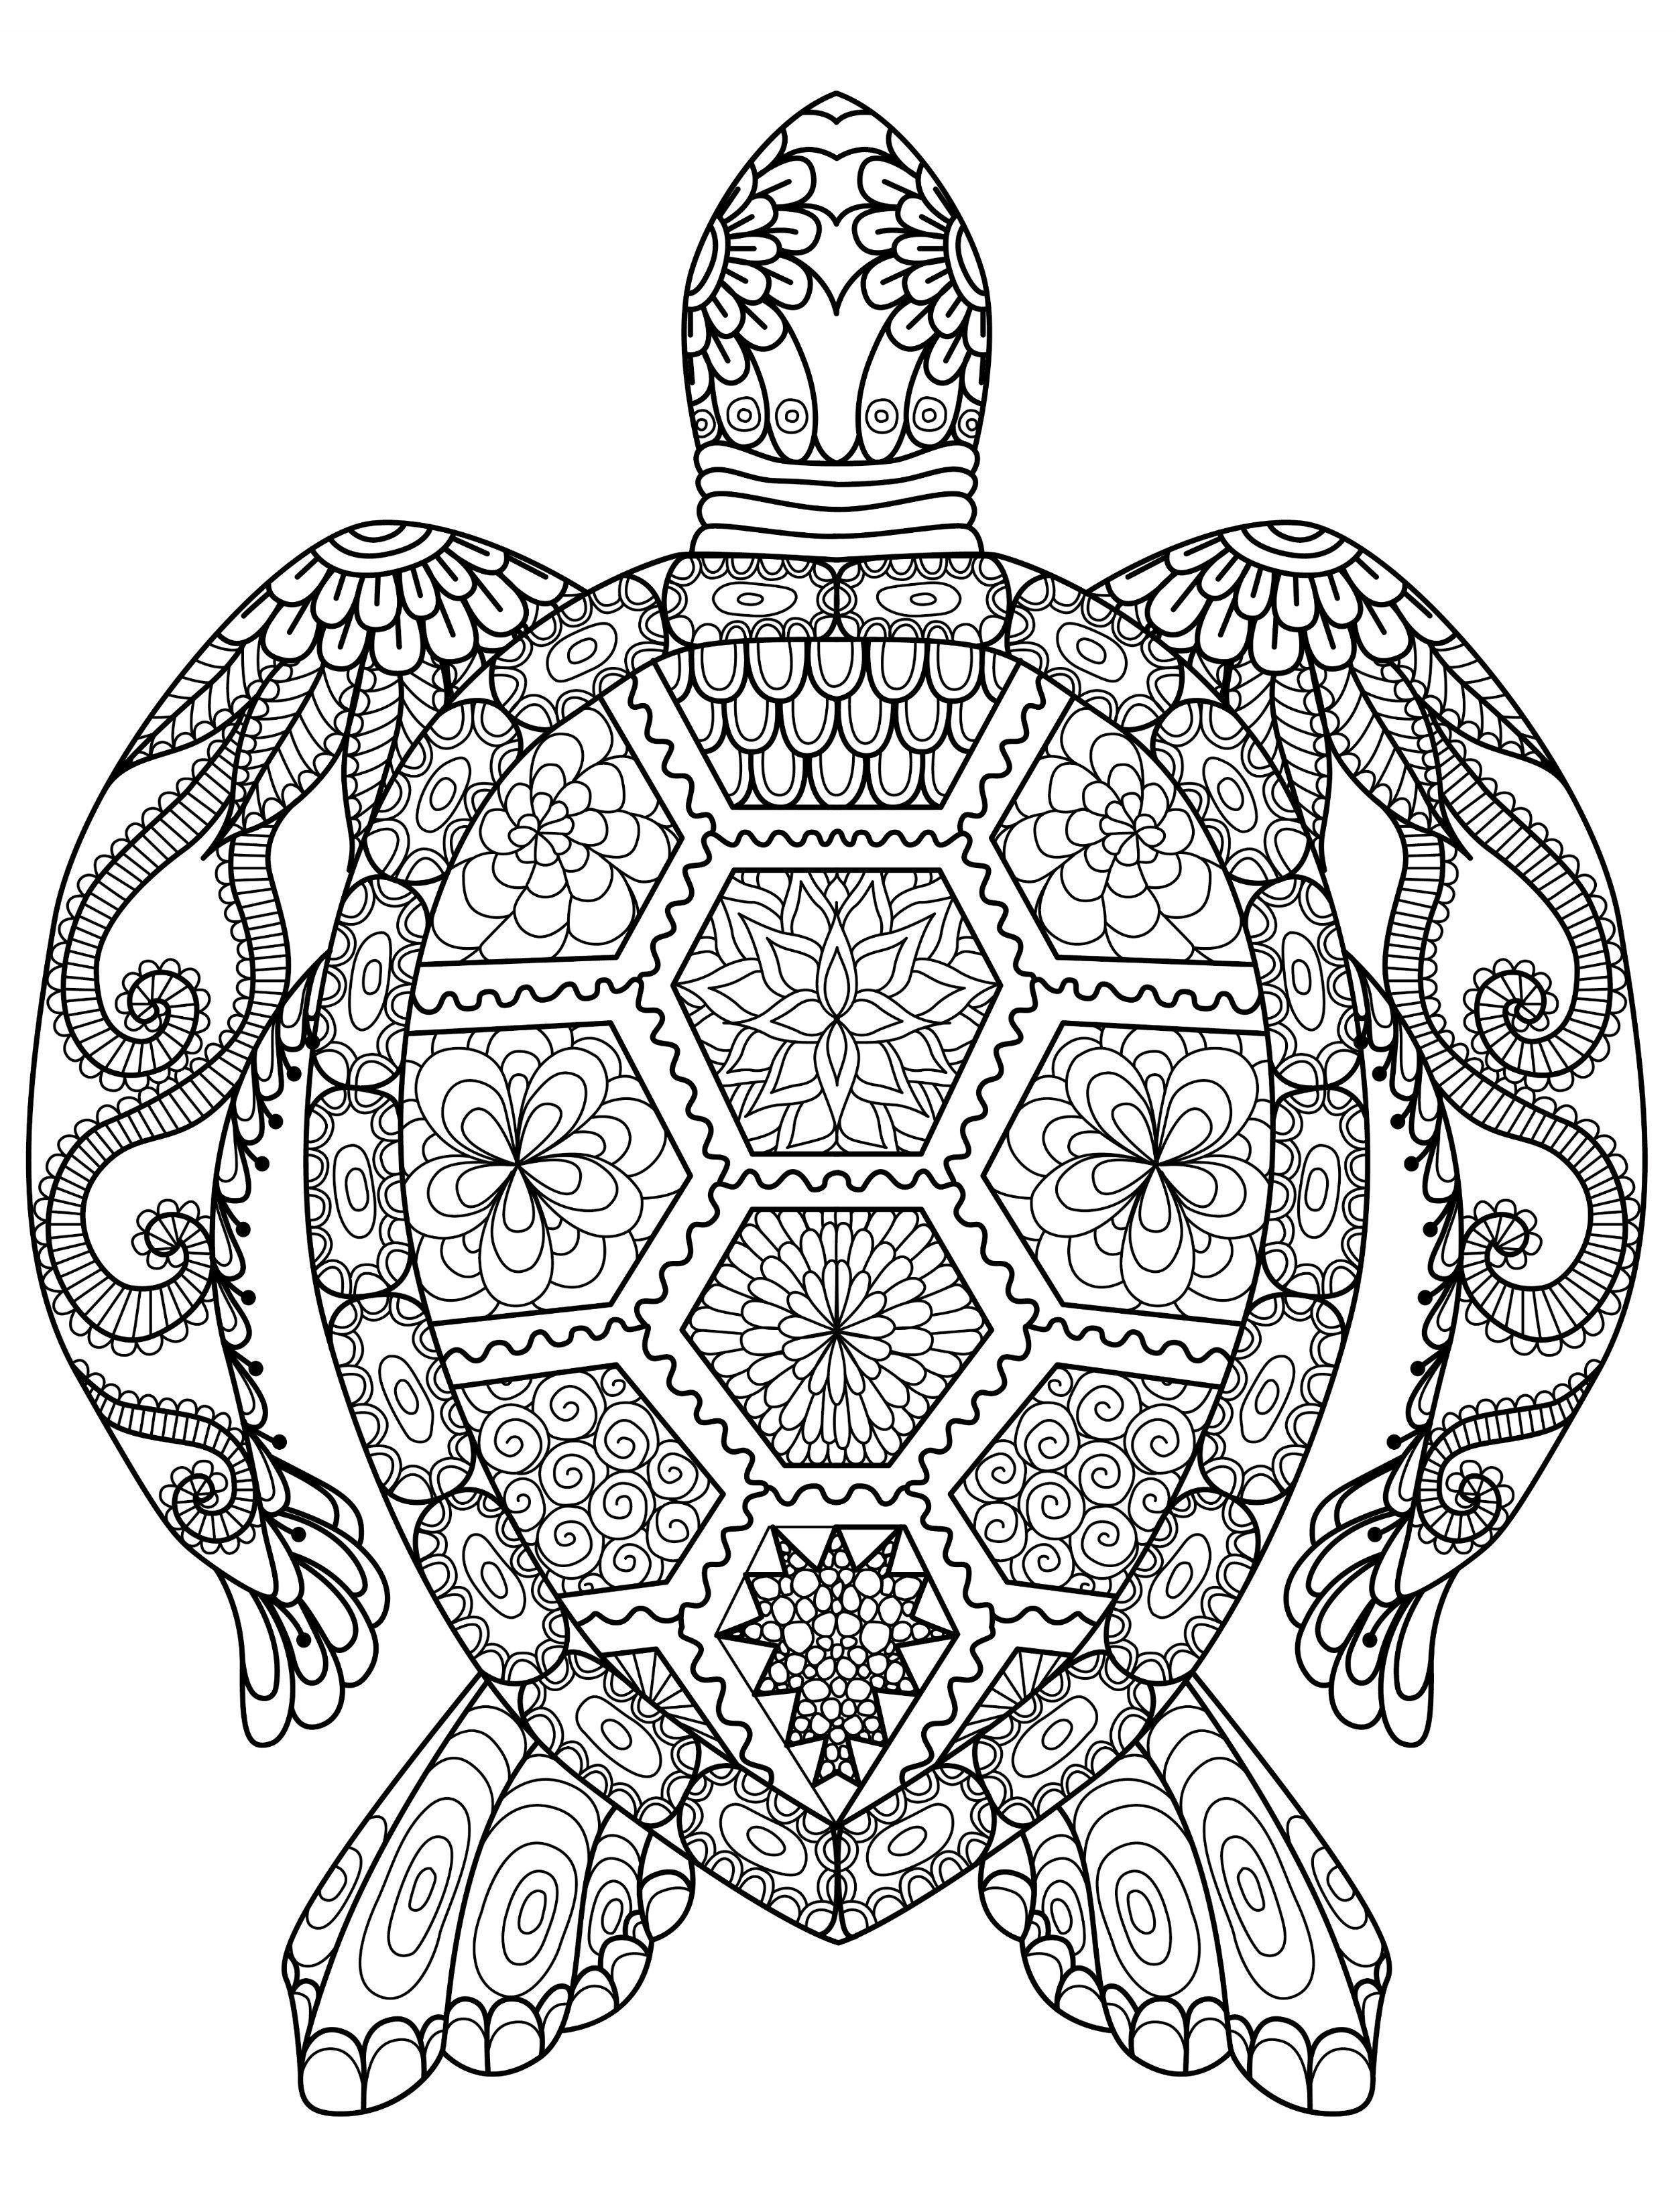 Animal Mandala Coloring Pages – Through the thousand images on the ...